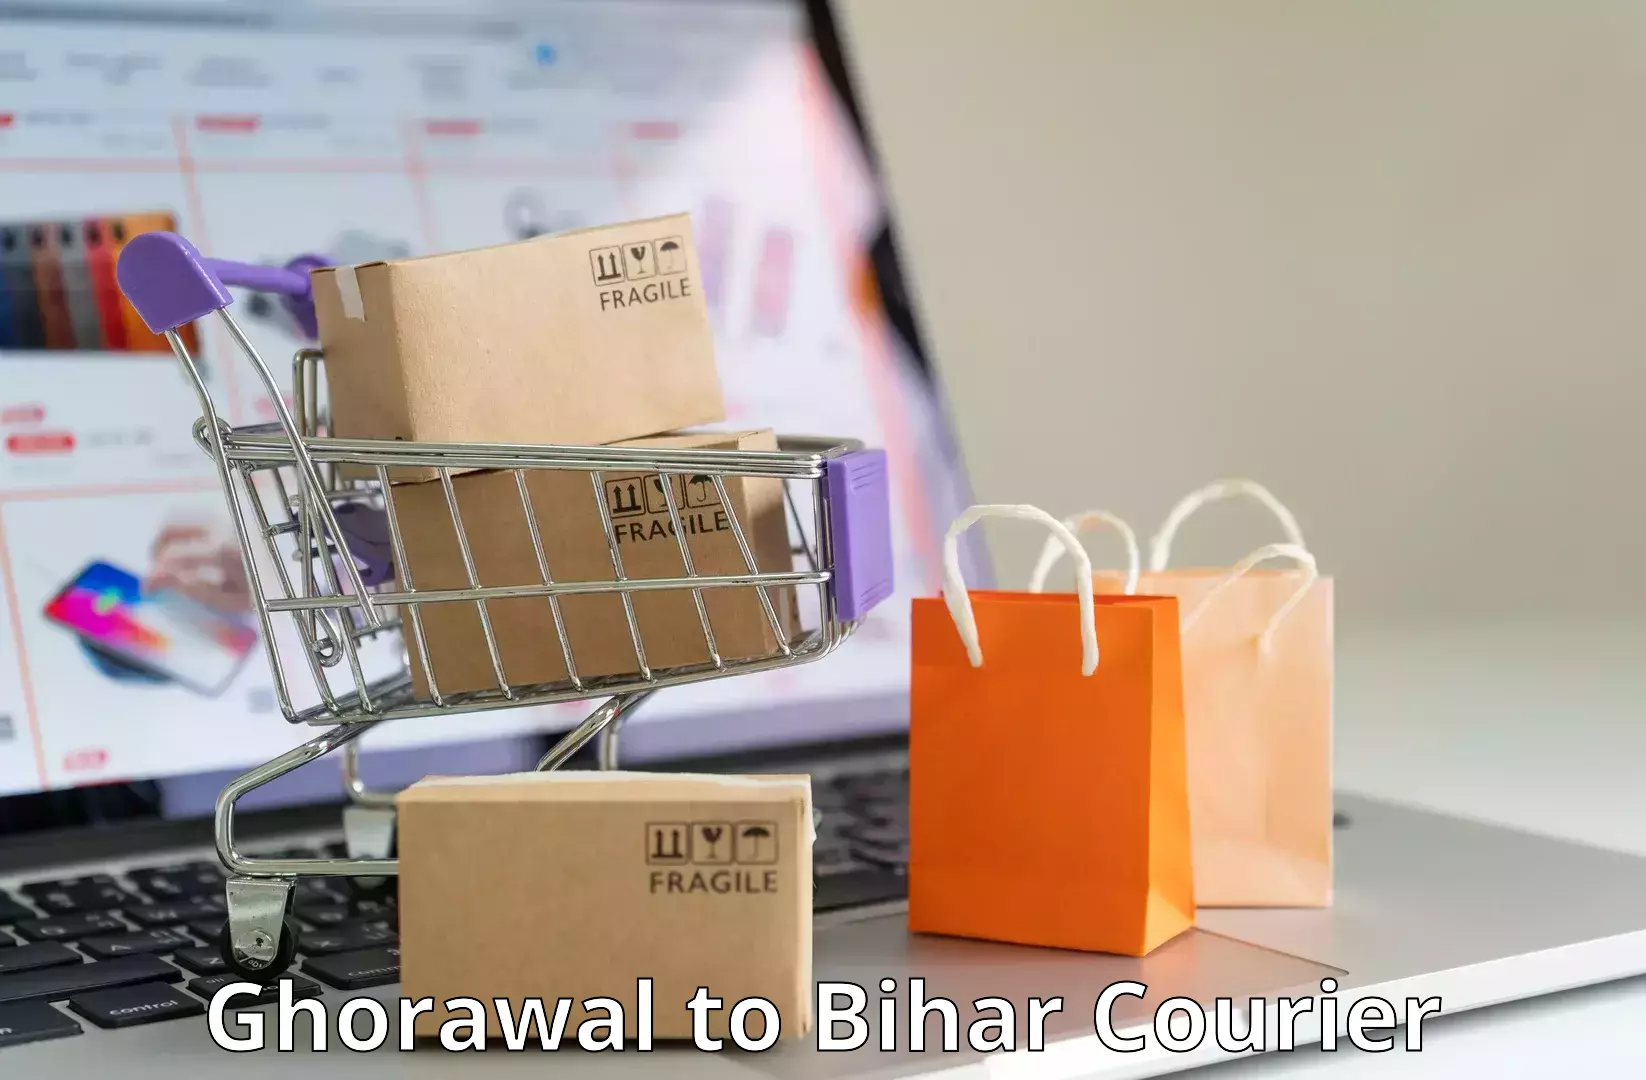 Advanced freight services in Ghorawal to Bihar